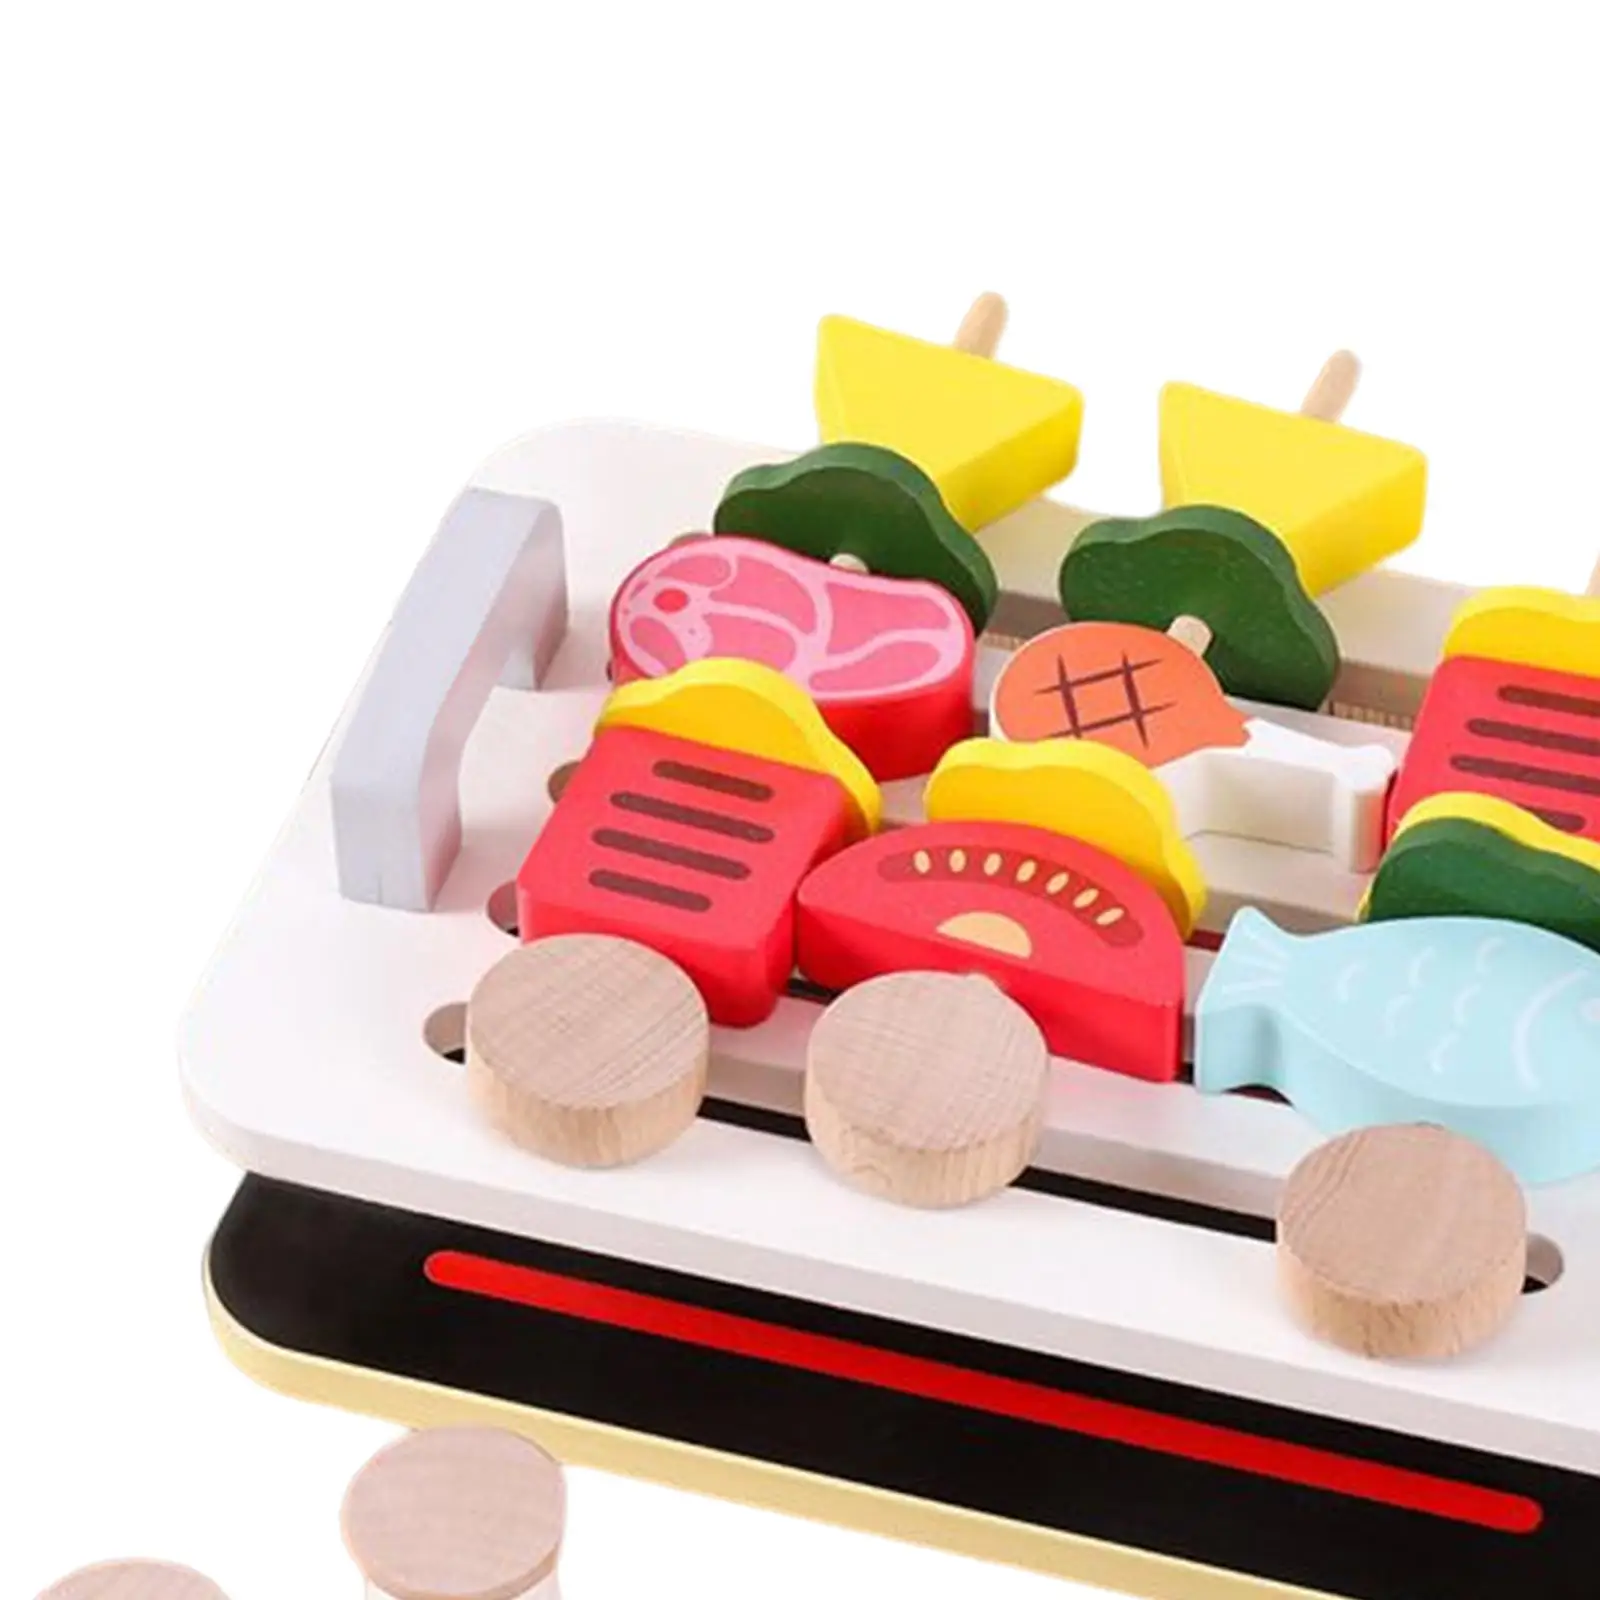 Simulation Wooden Barbecue Playset Pretend Play Kitchen Toys Educational Food Kitchen Toys for Preschool Children Toddlers Gifts